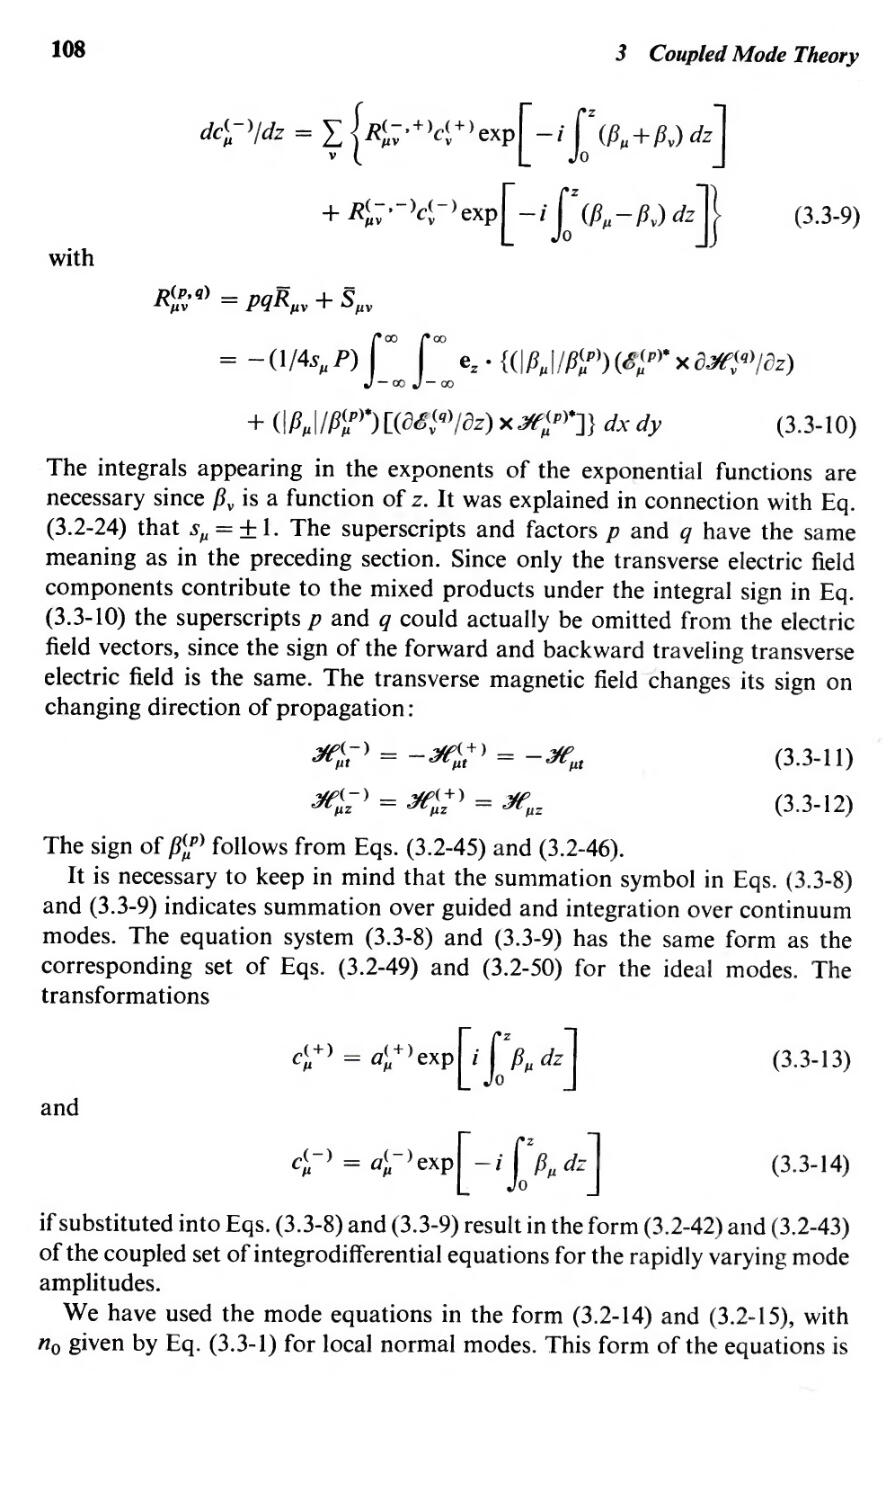 108
108
108
--- local normal modes, 108
Integrodifferential equation, 108